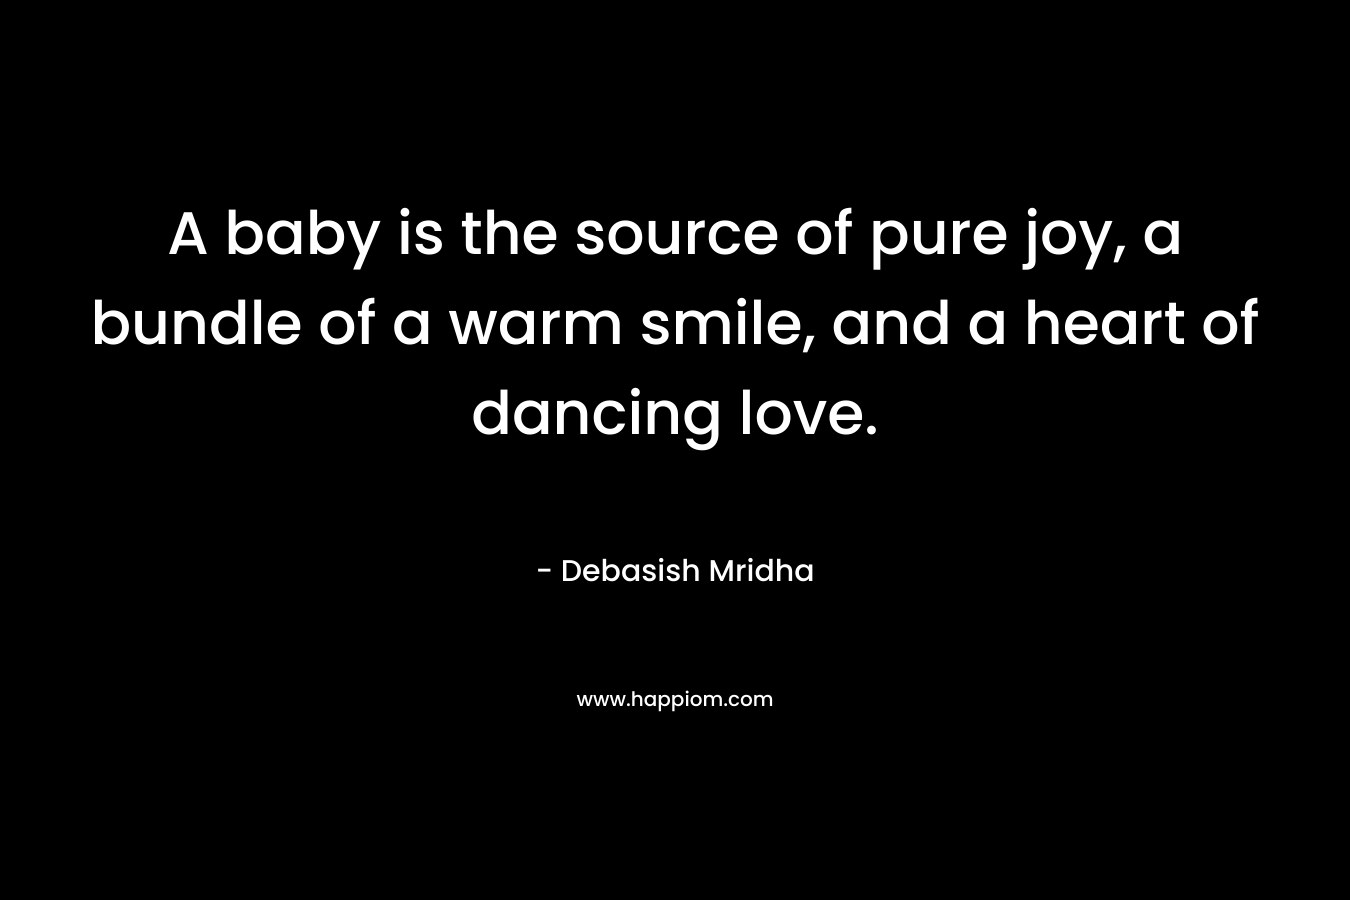 A baby is the source of pure joy, a bundle of a warm smile, and a heart of dancing love.